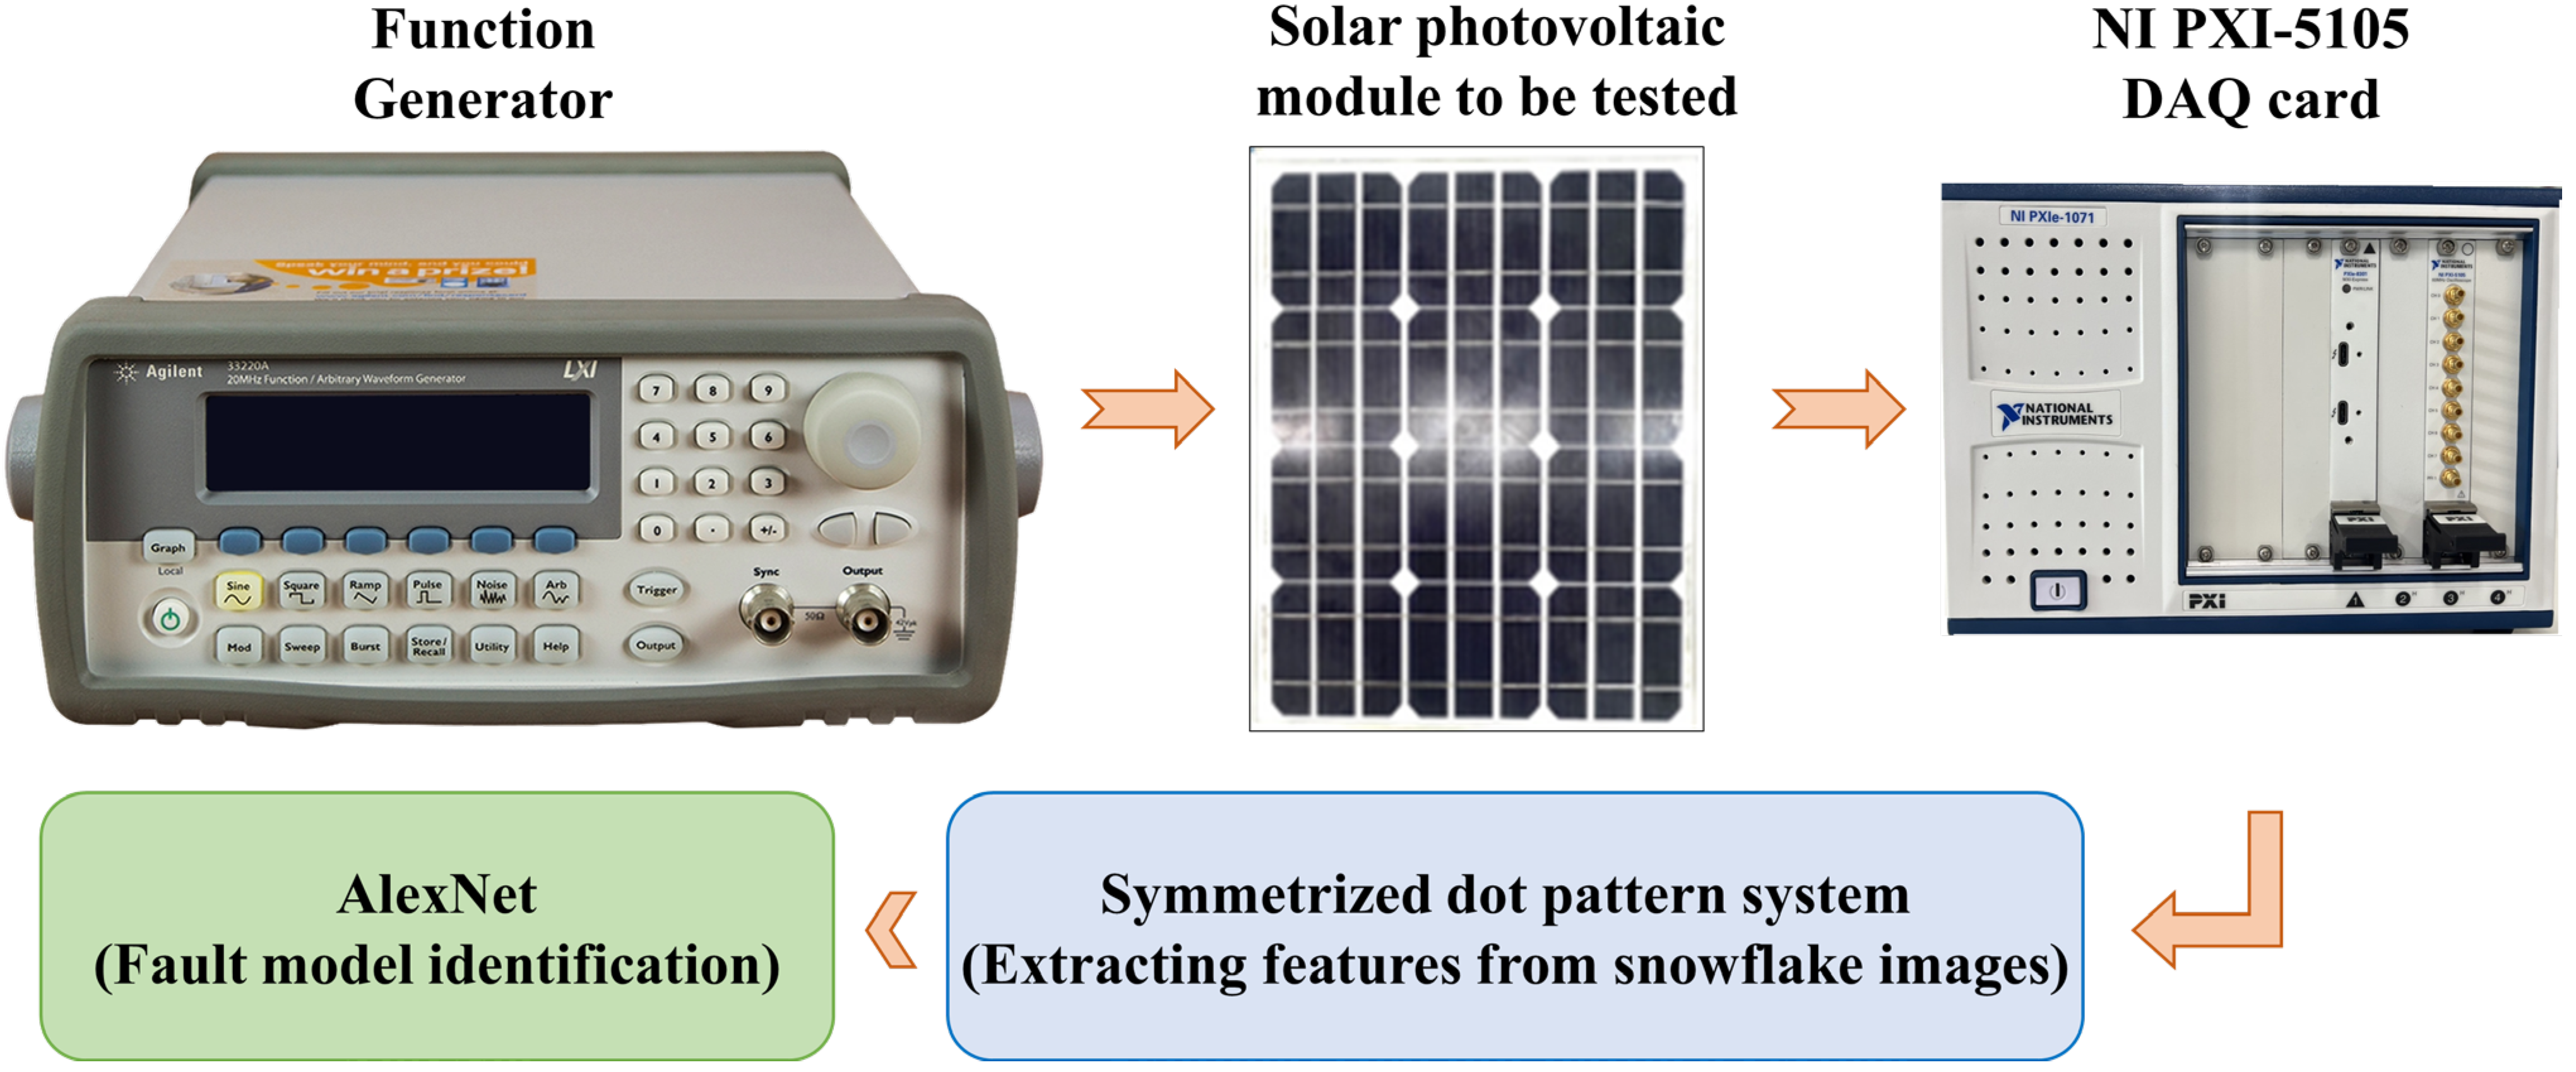 Energies | Free Full-Text | Fault Diagnosis for PV Modules Based on AlexNet  and Symmetrized Dot Pattern